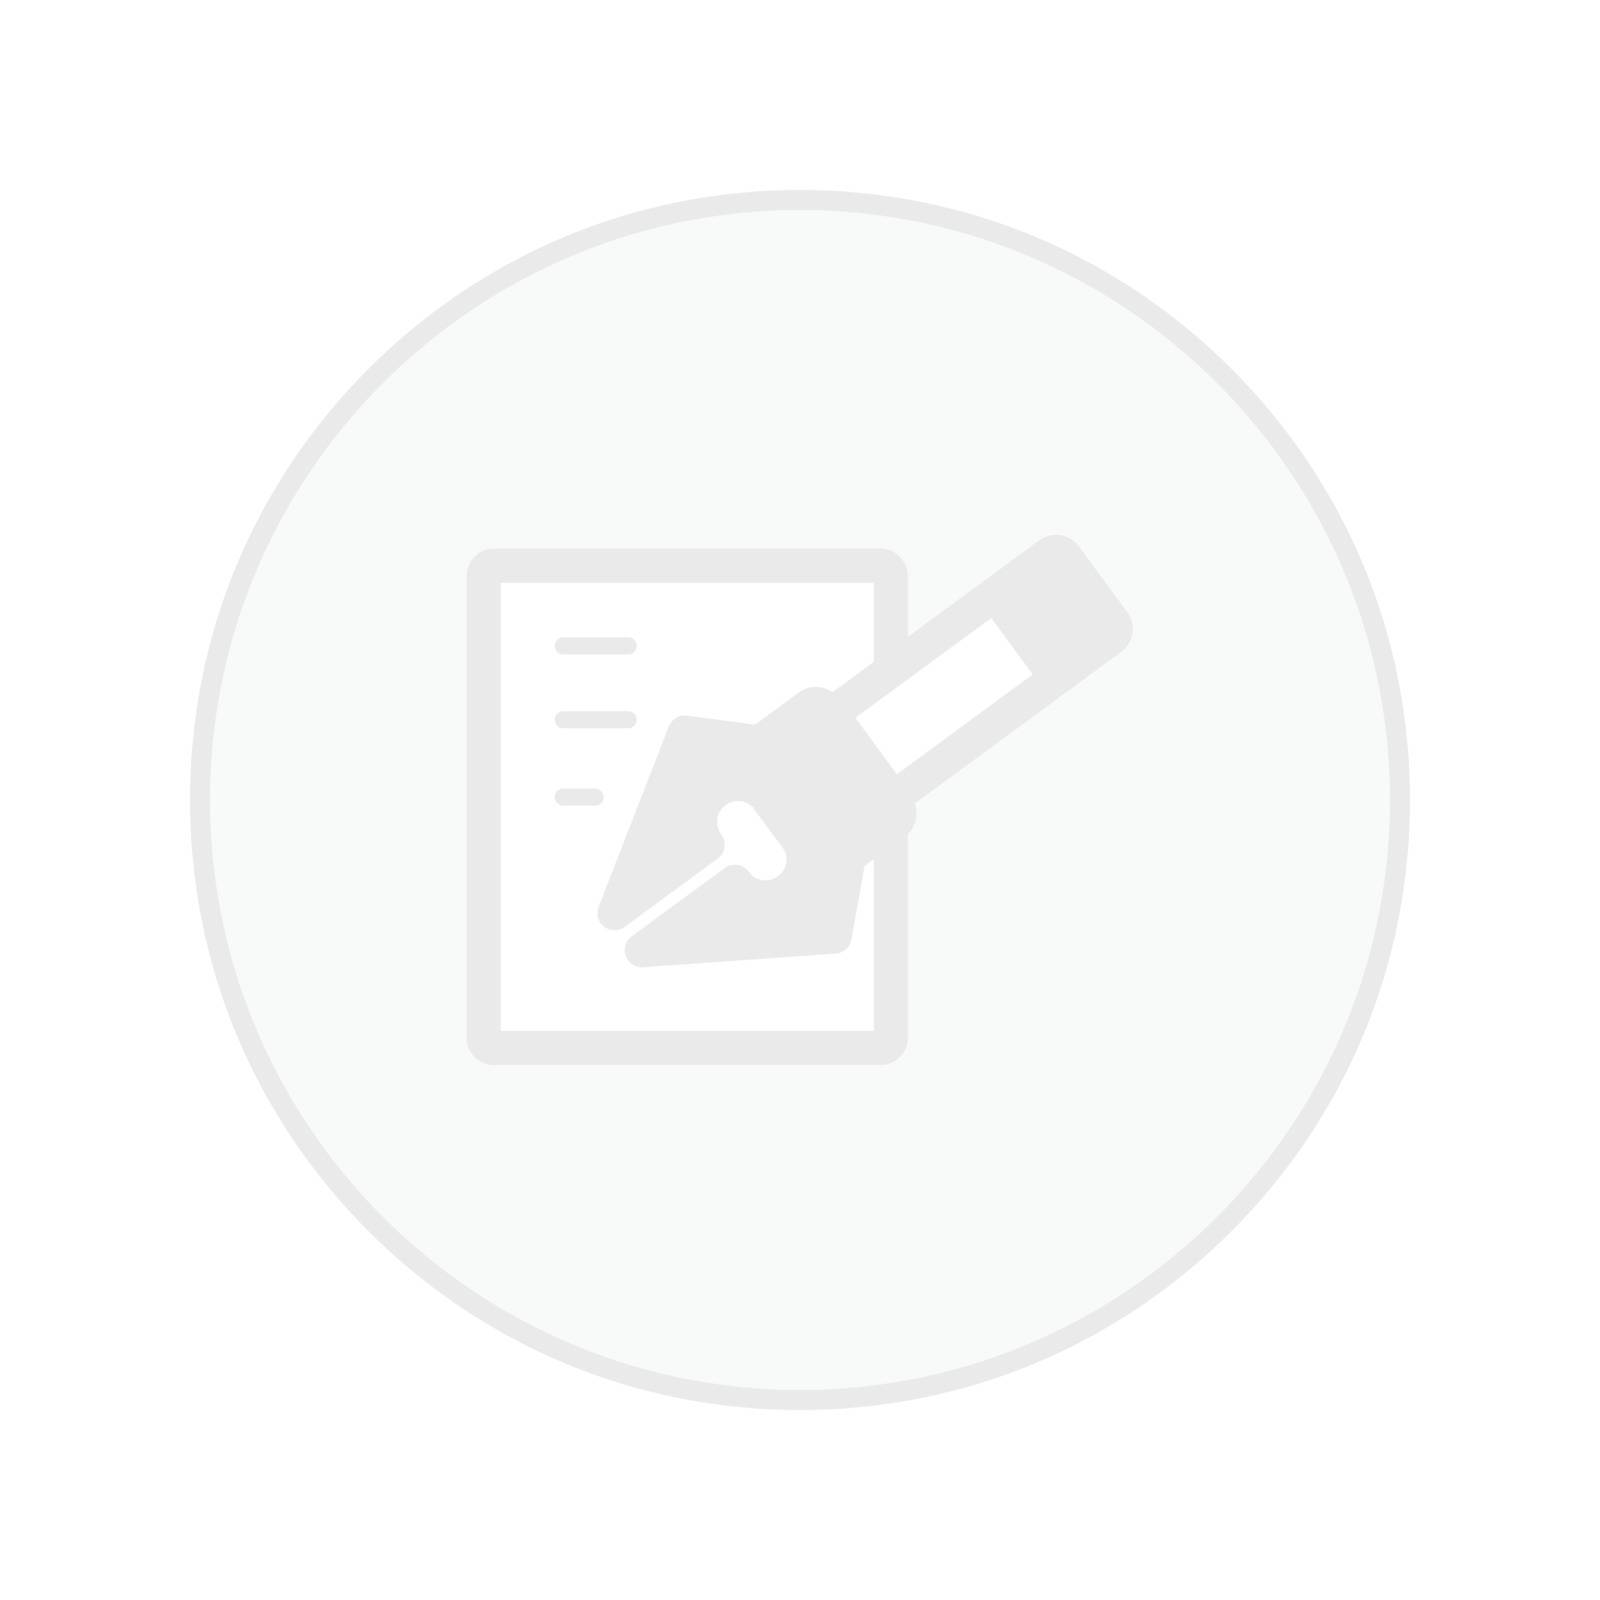 office paper white button icon by PAPAGraph